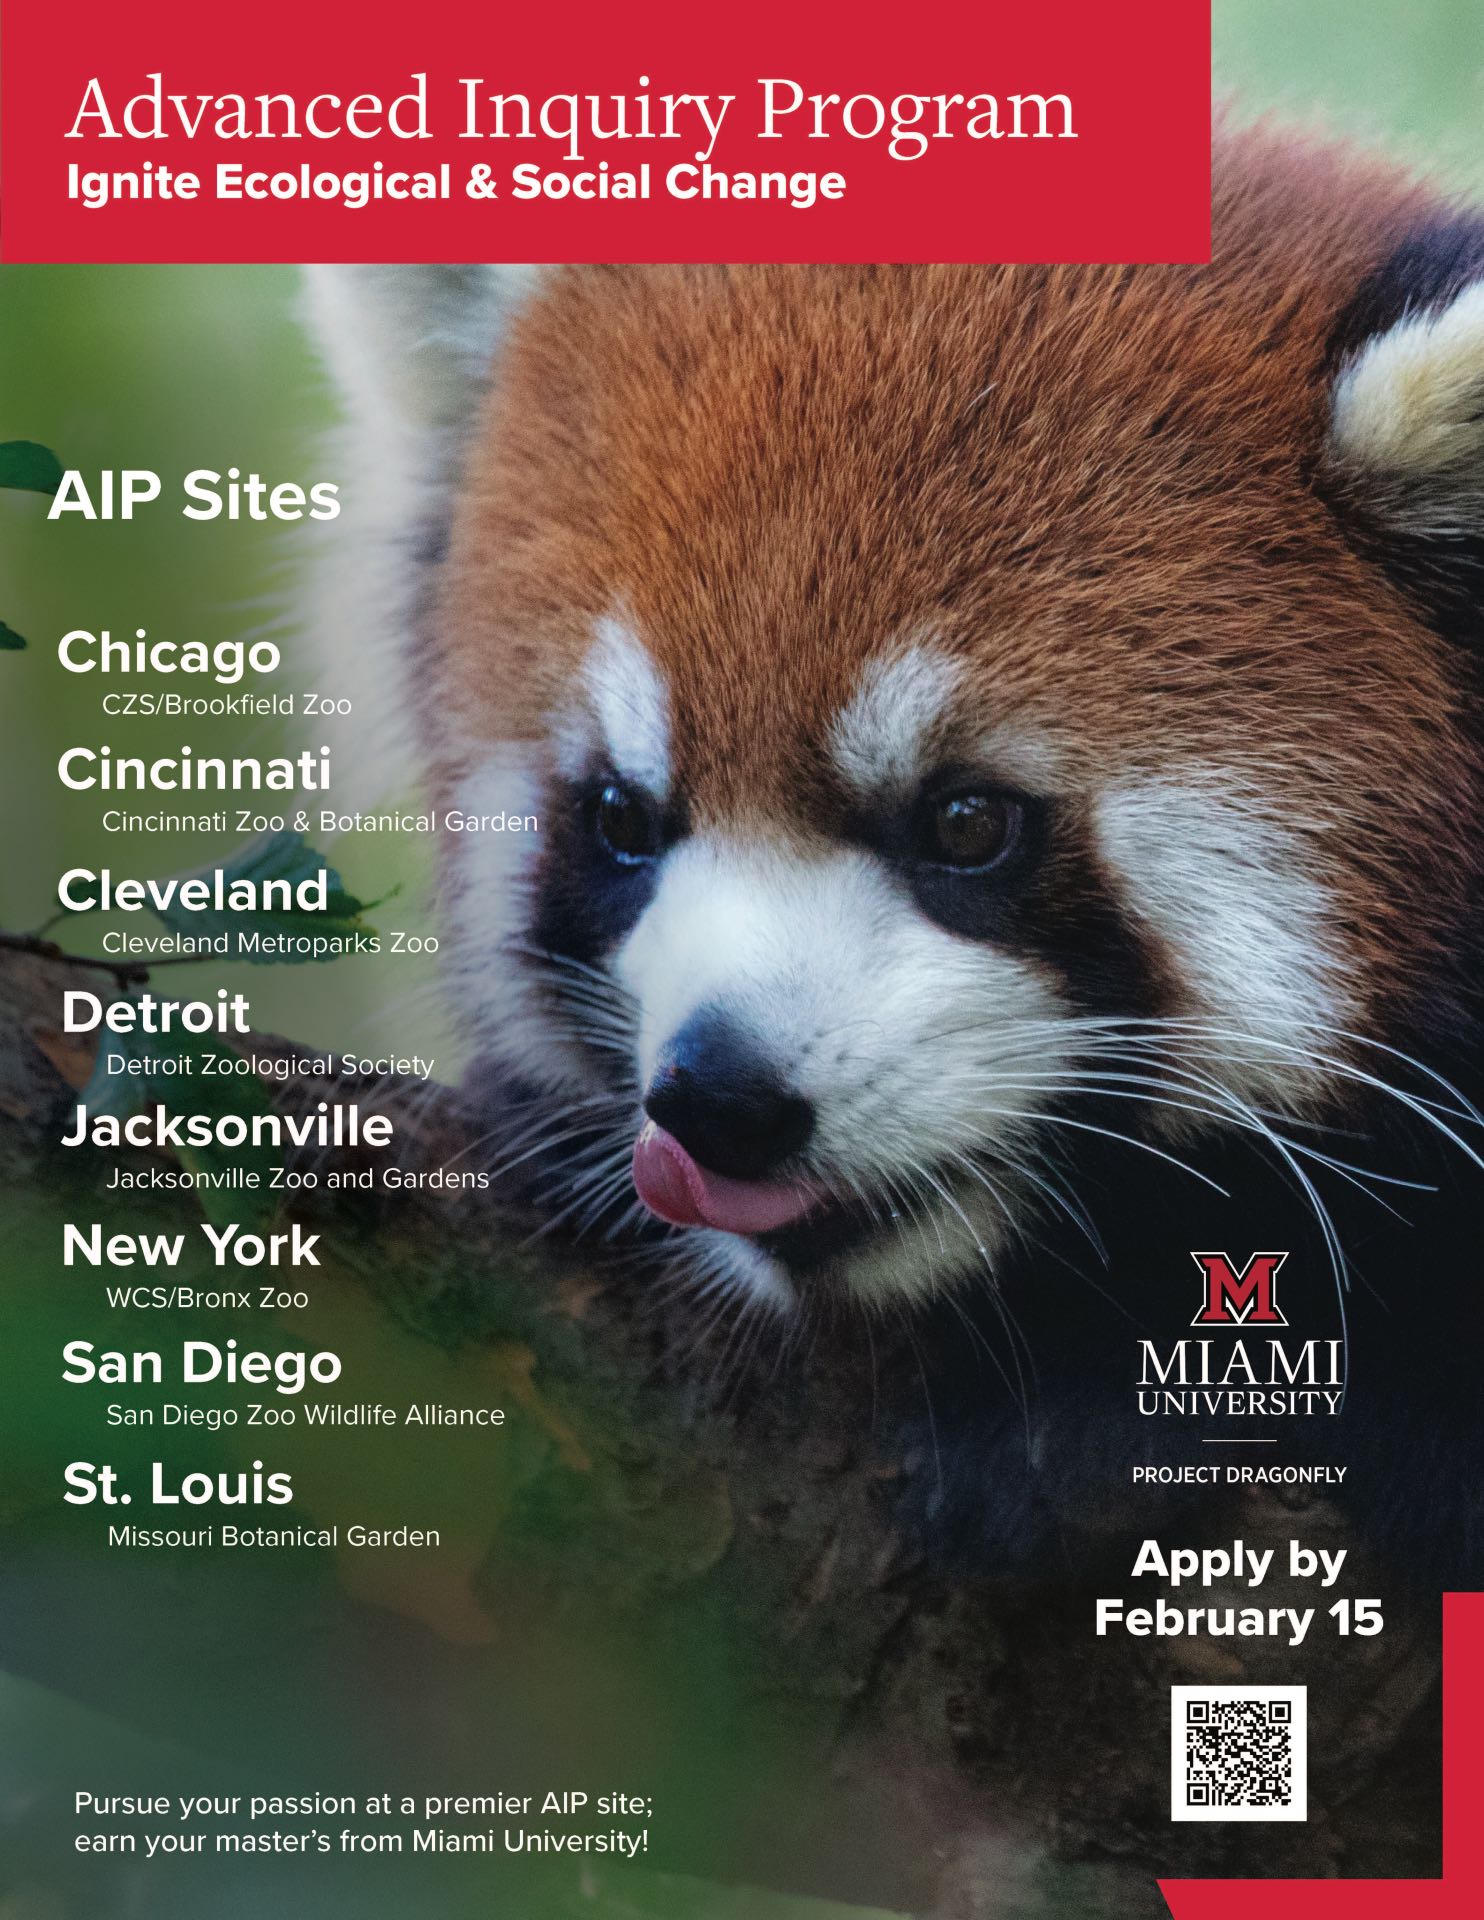 aip flyer red panda